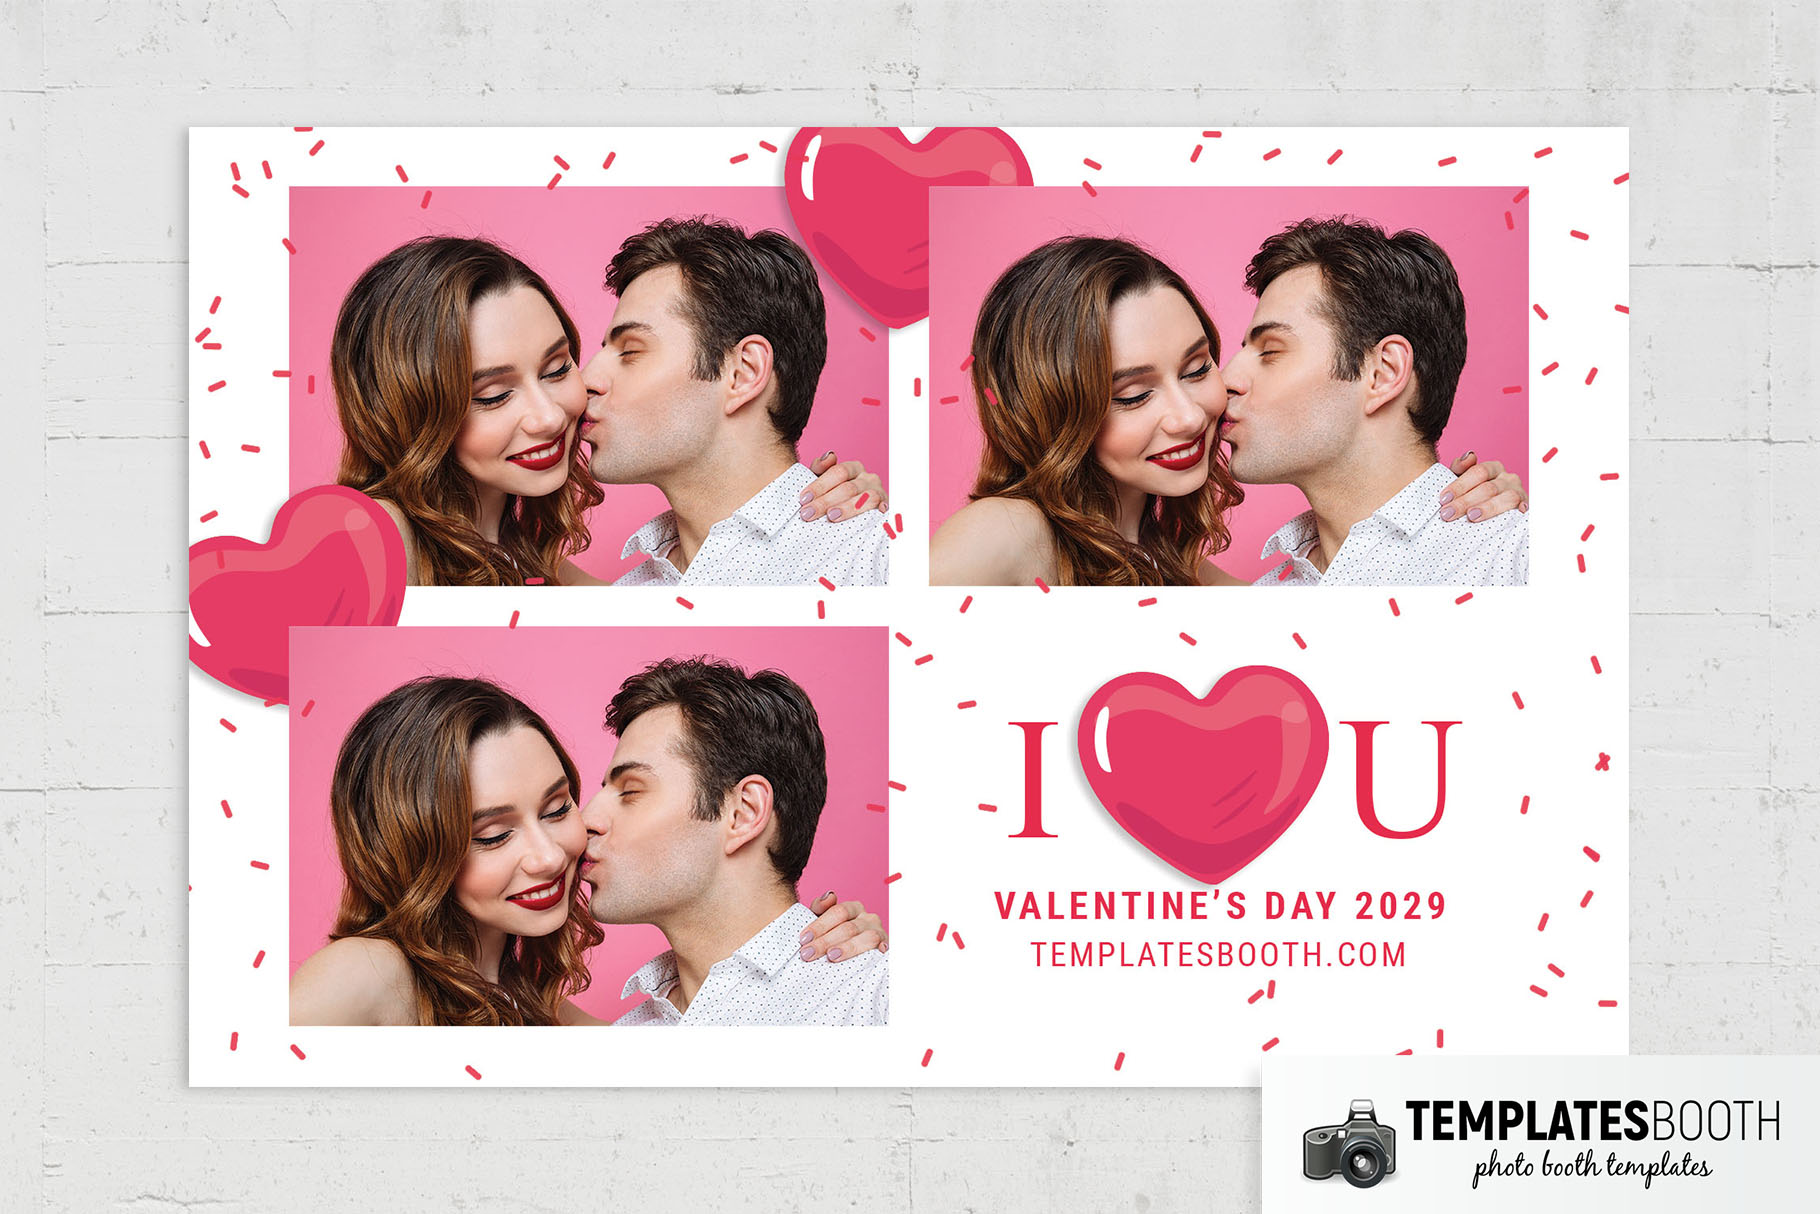 I Love You Valentine's Photo Booth Template